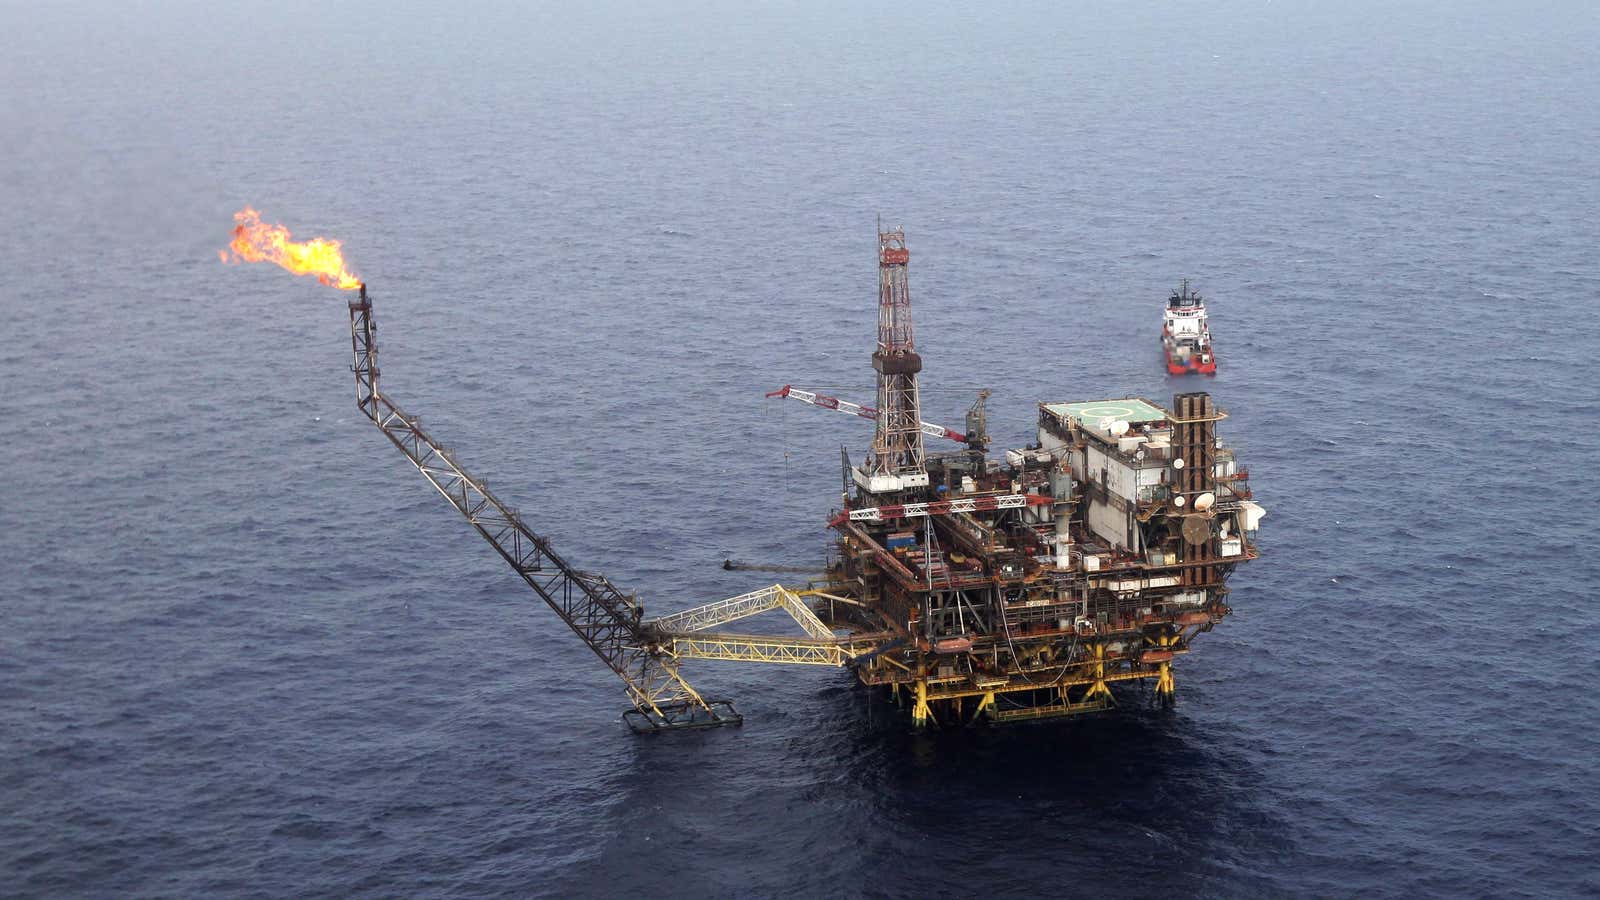 The Bouri oilfield, Libya’s biggest offshore field, is a joint venture with Italy’s Eni. Eni plans to increase its production of fossil fuels until 2025.